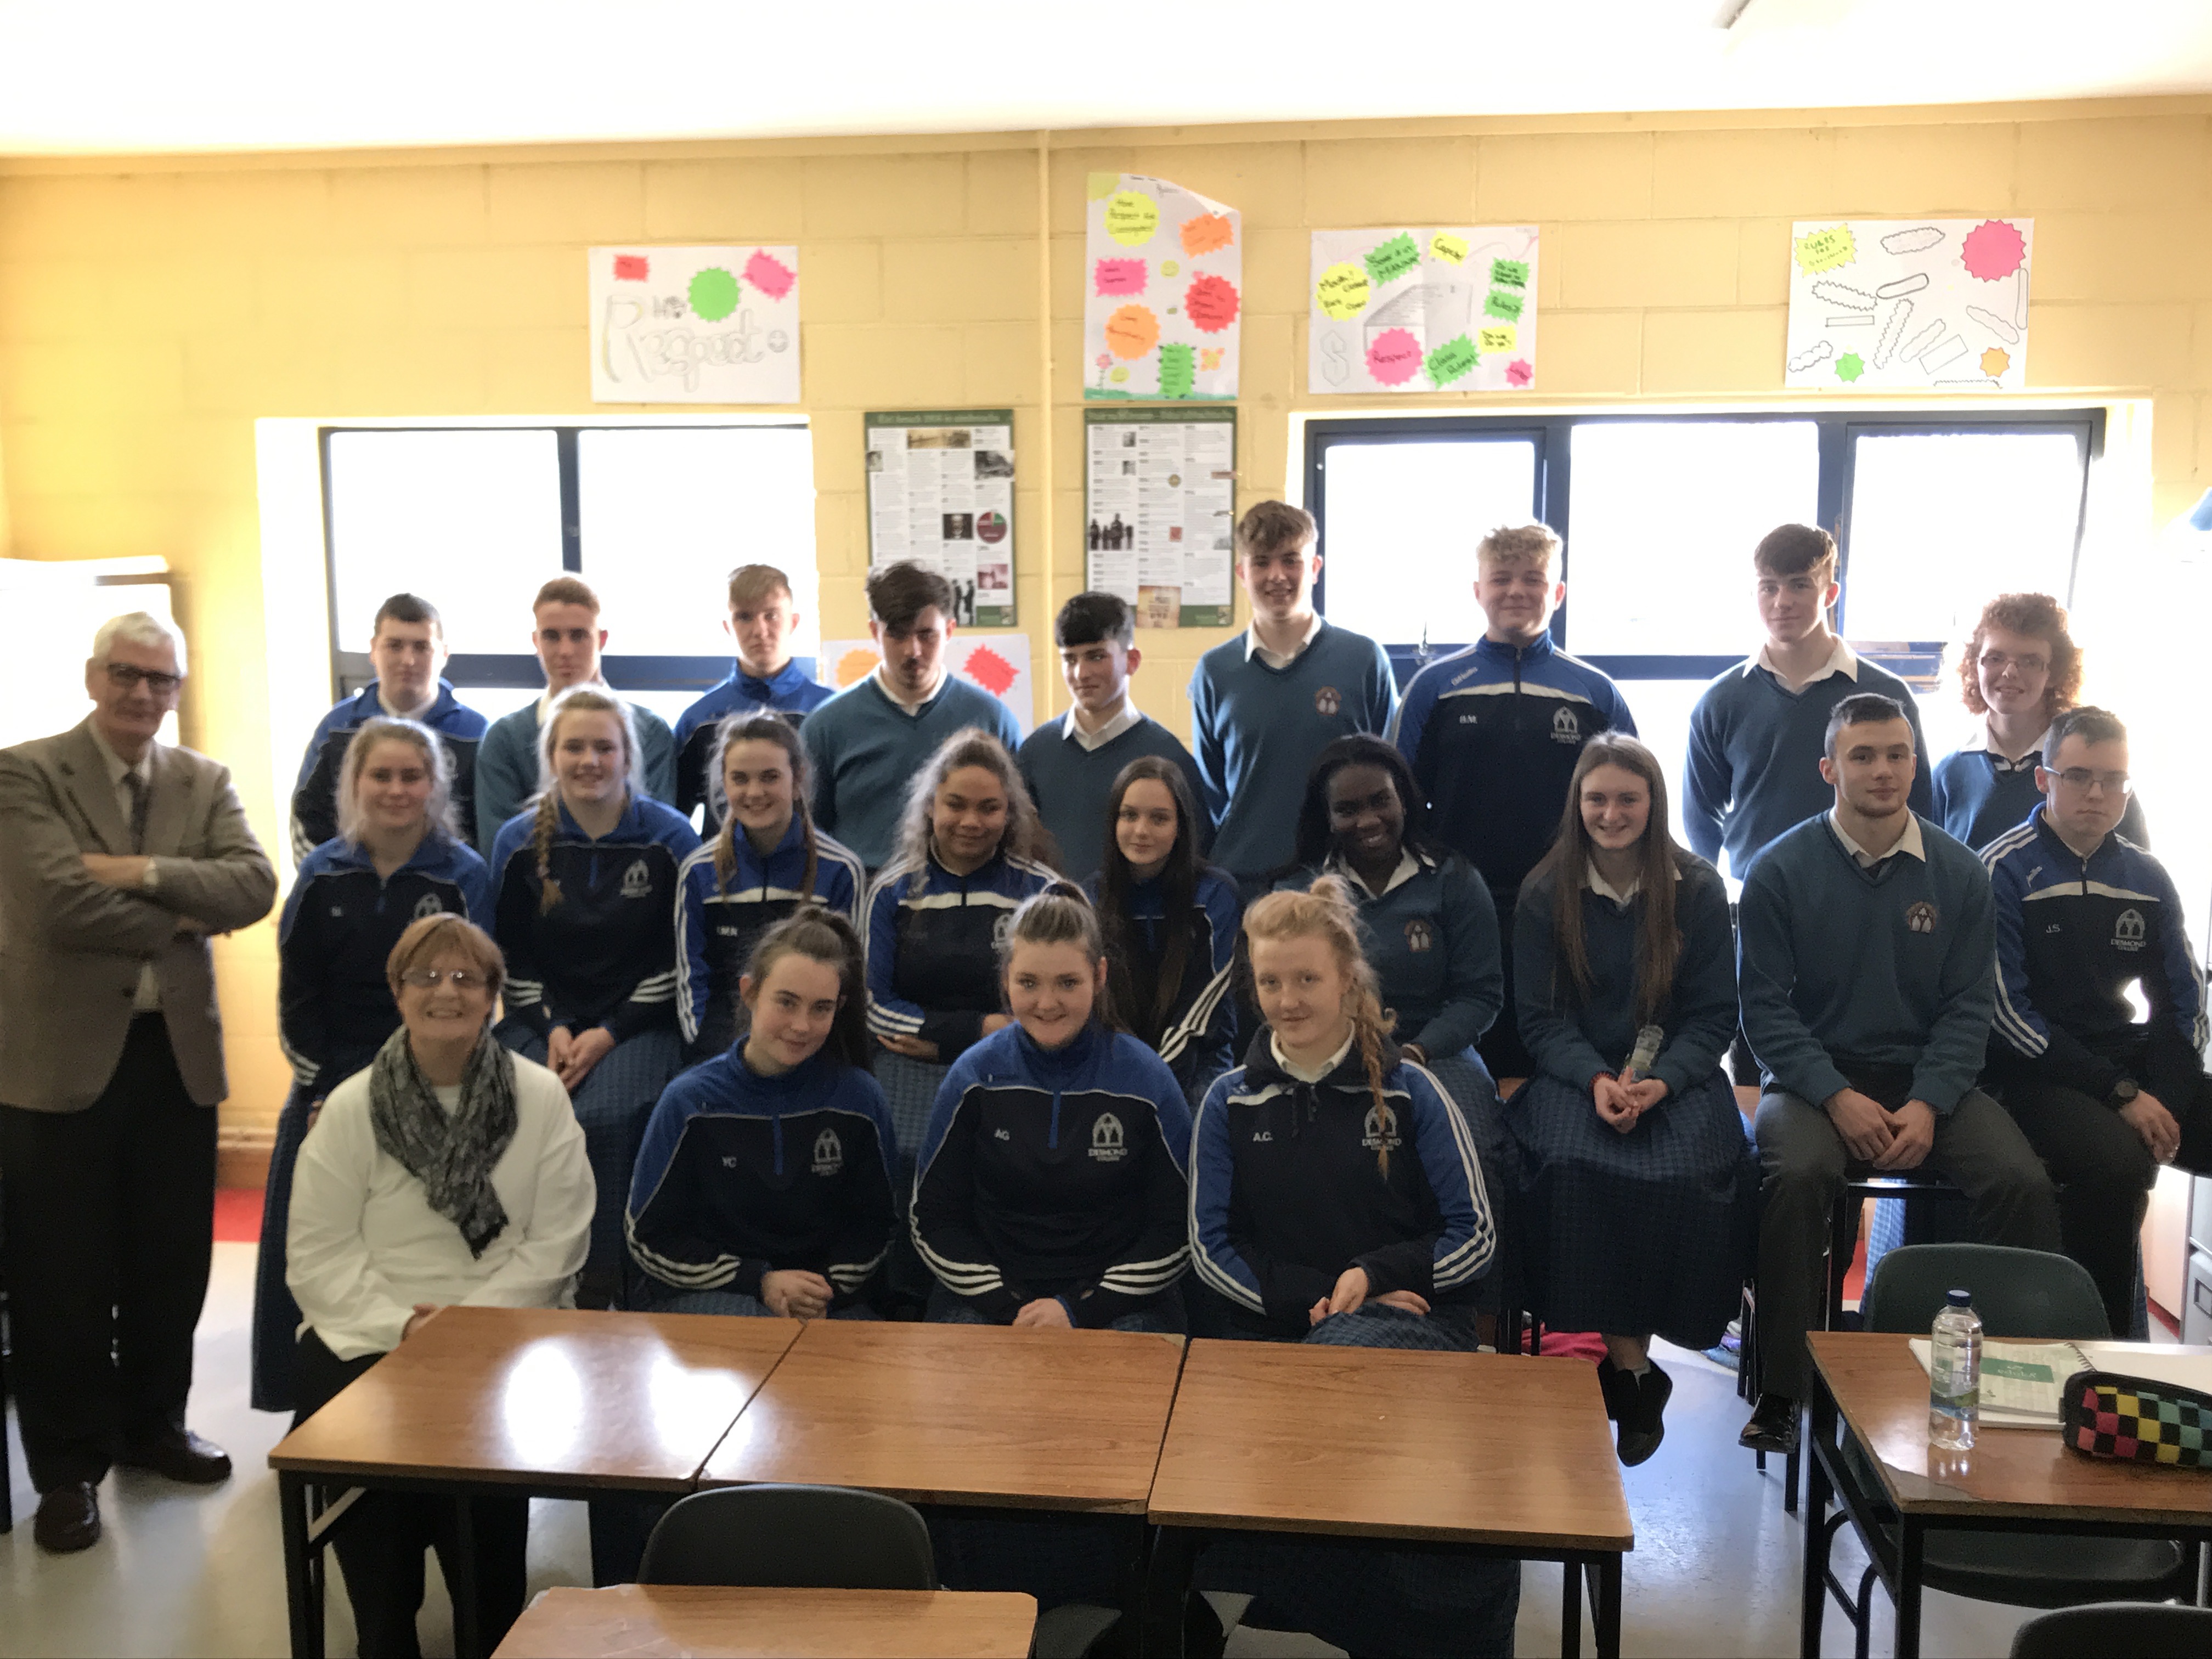 Dec 2017: Denis and Noleen Sexton giving a talk to the Transition Year Students about the work being done by the Irish Society for Autism